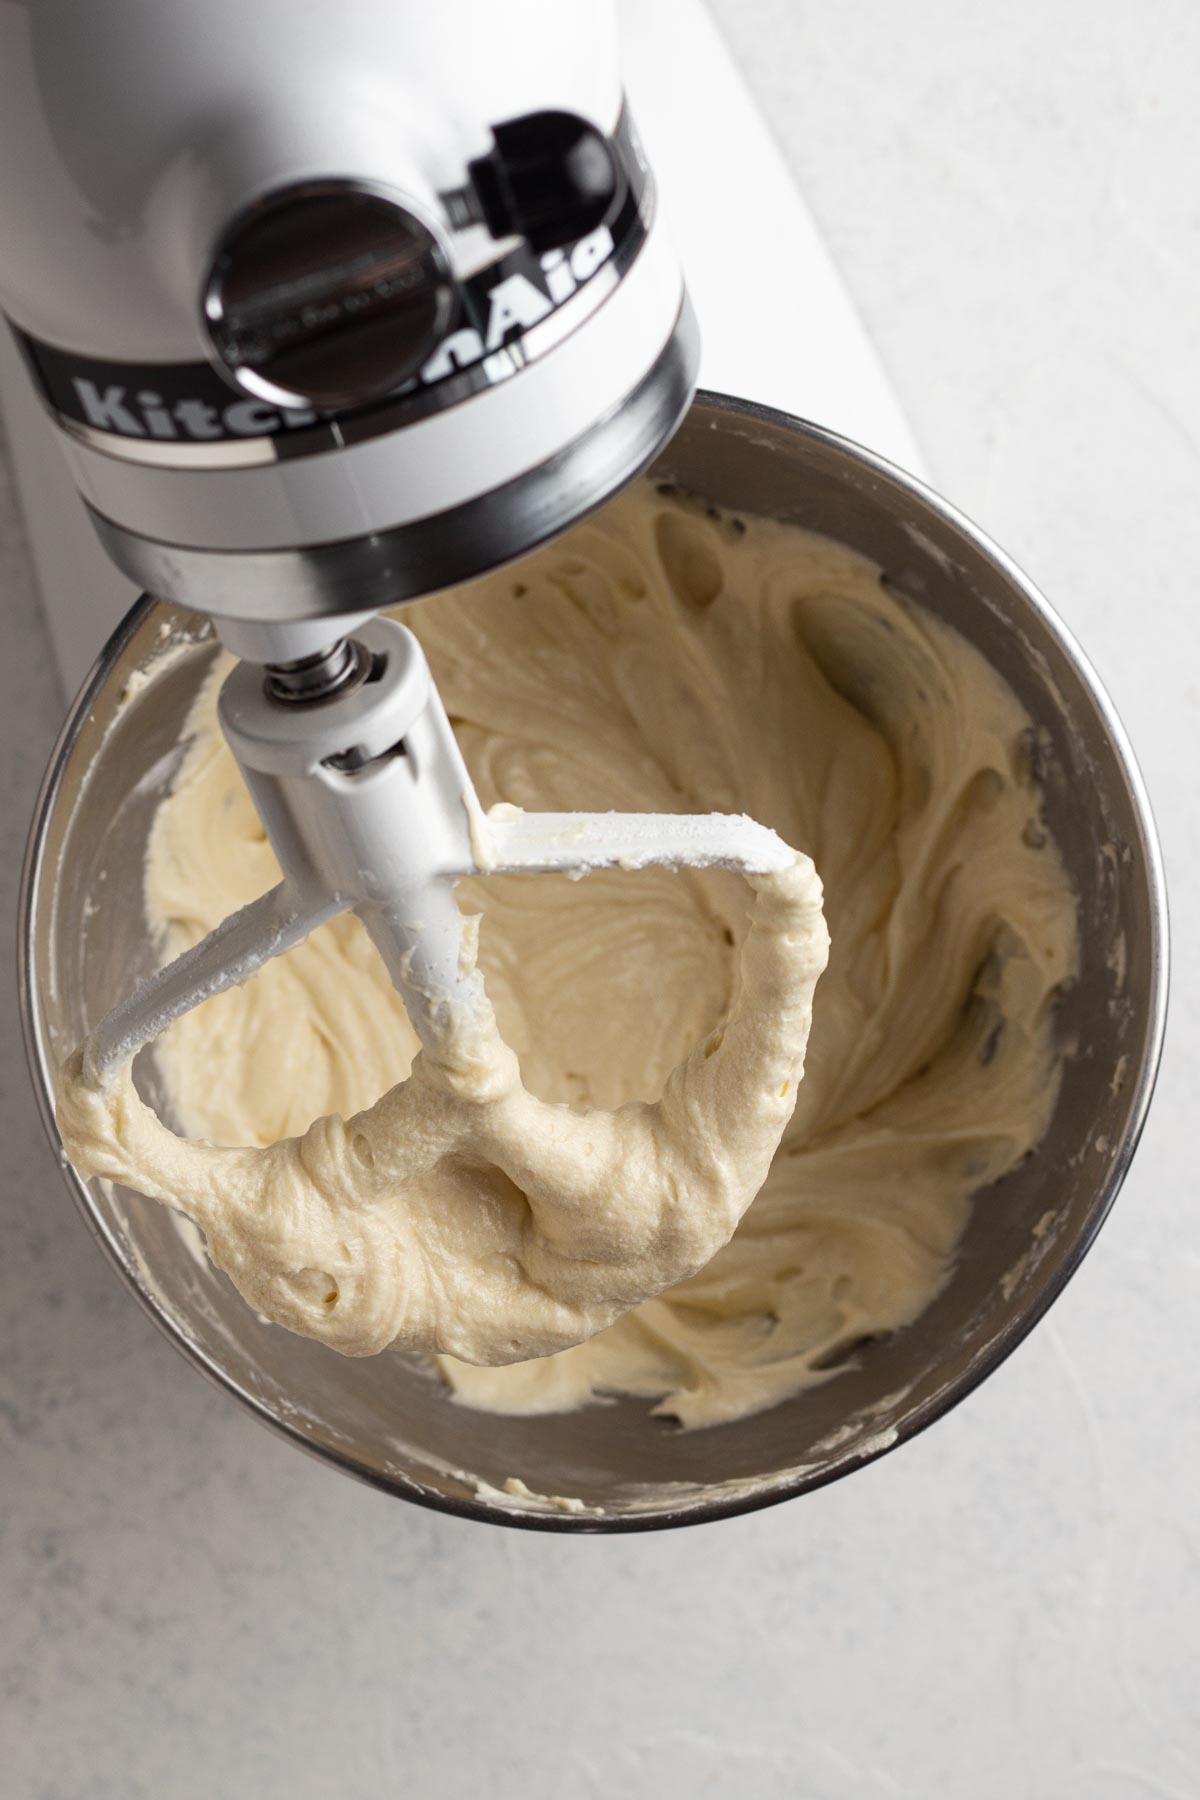 Pound cake batter in the bowl of a stand mixer.